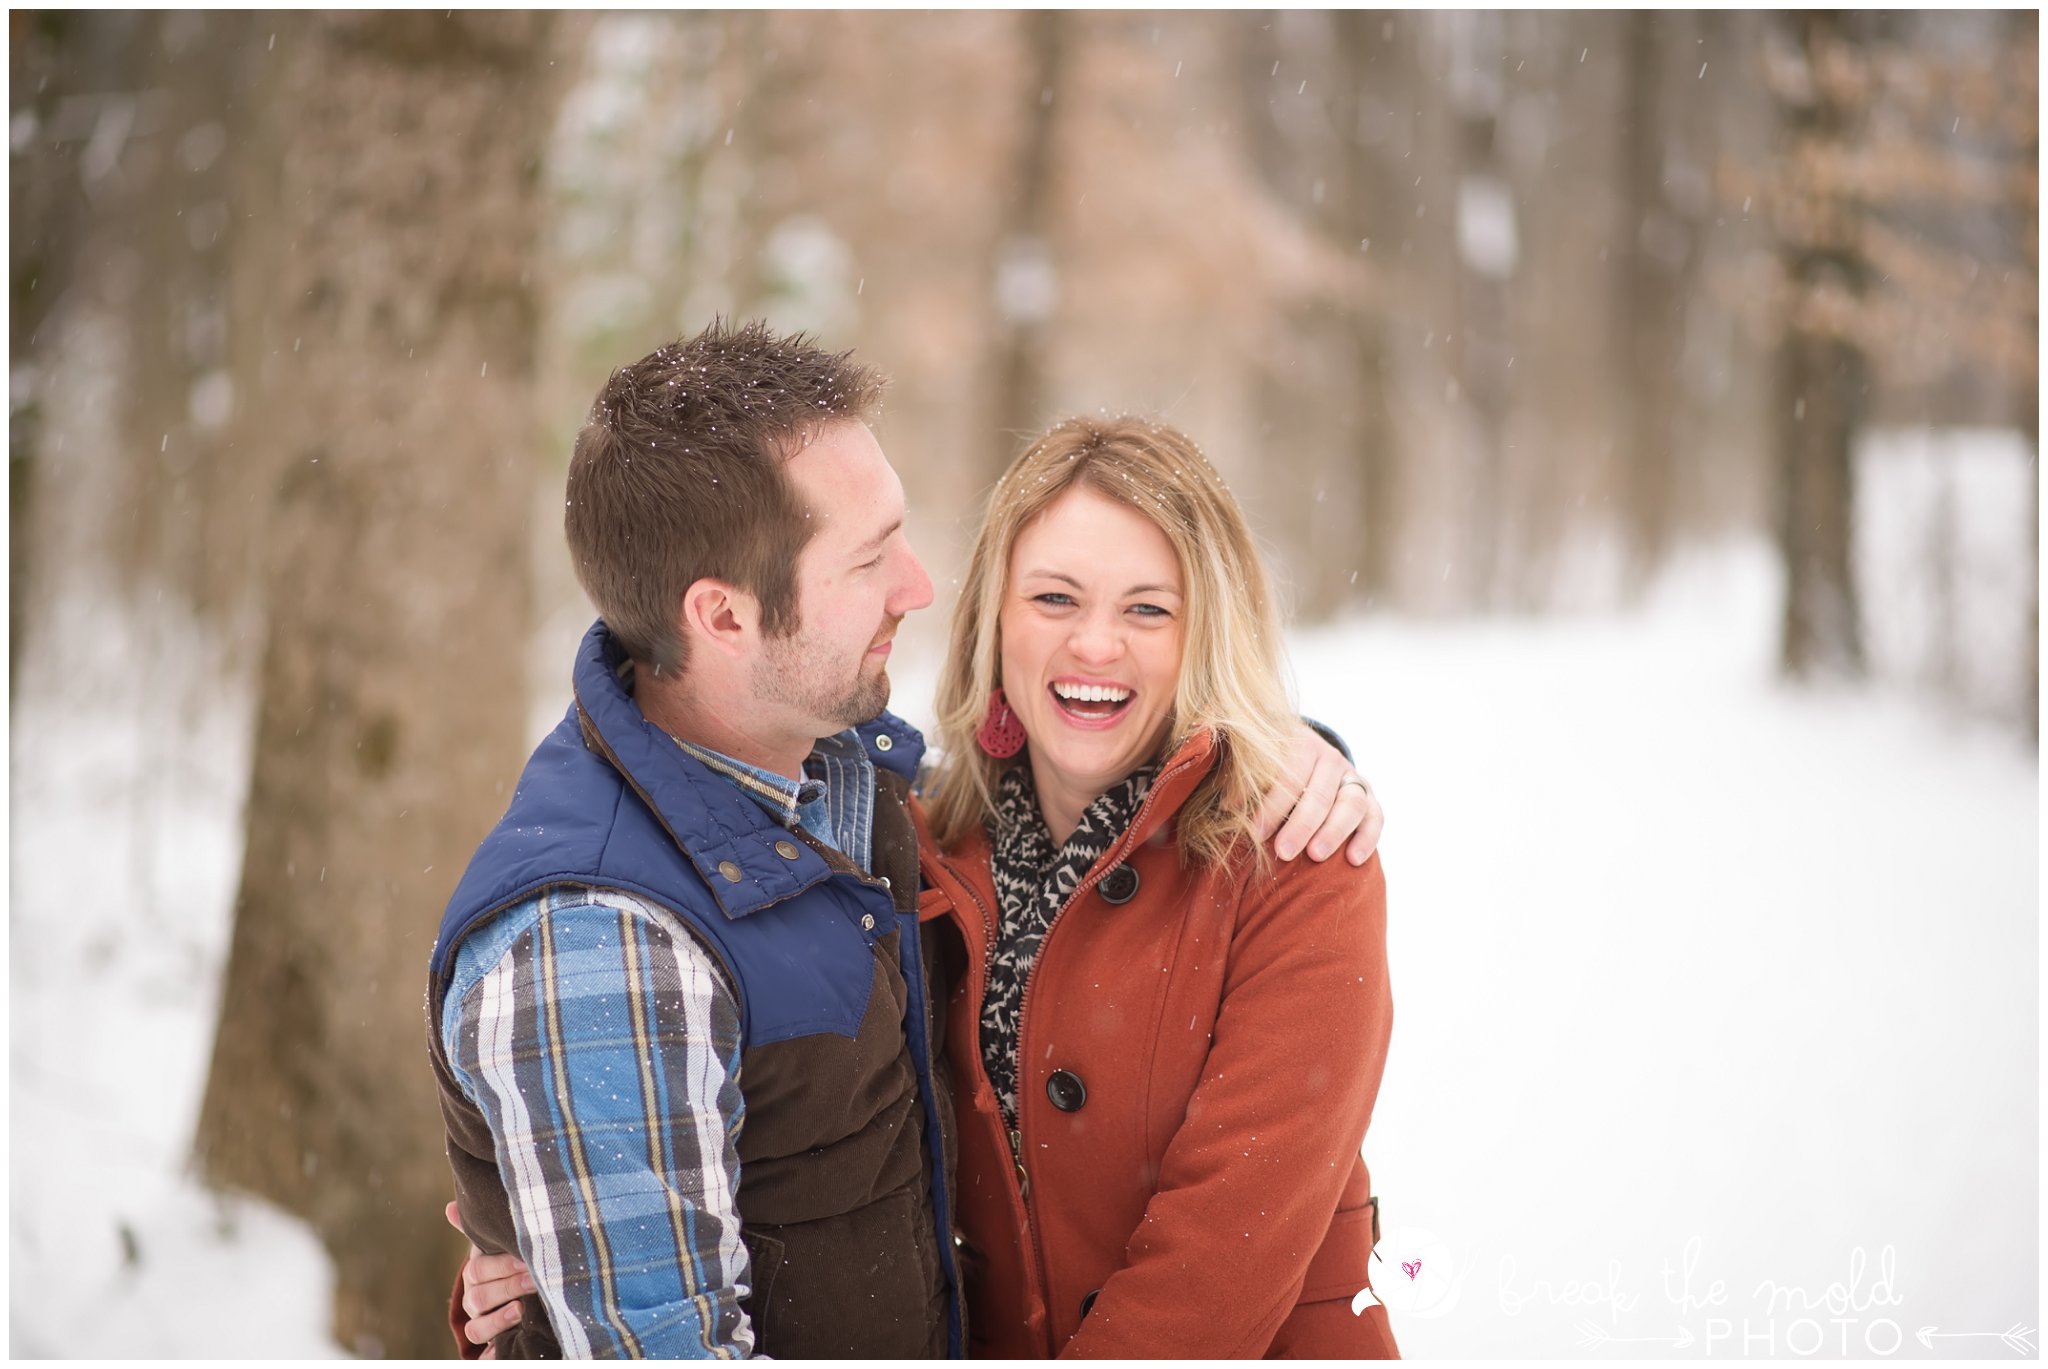 break-the-mold-photo-snowy-day-engagement-photos-knoxville-tn-tennessee-snow-day-pictures-winter-outdoor-unique-family_1499.jpg